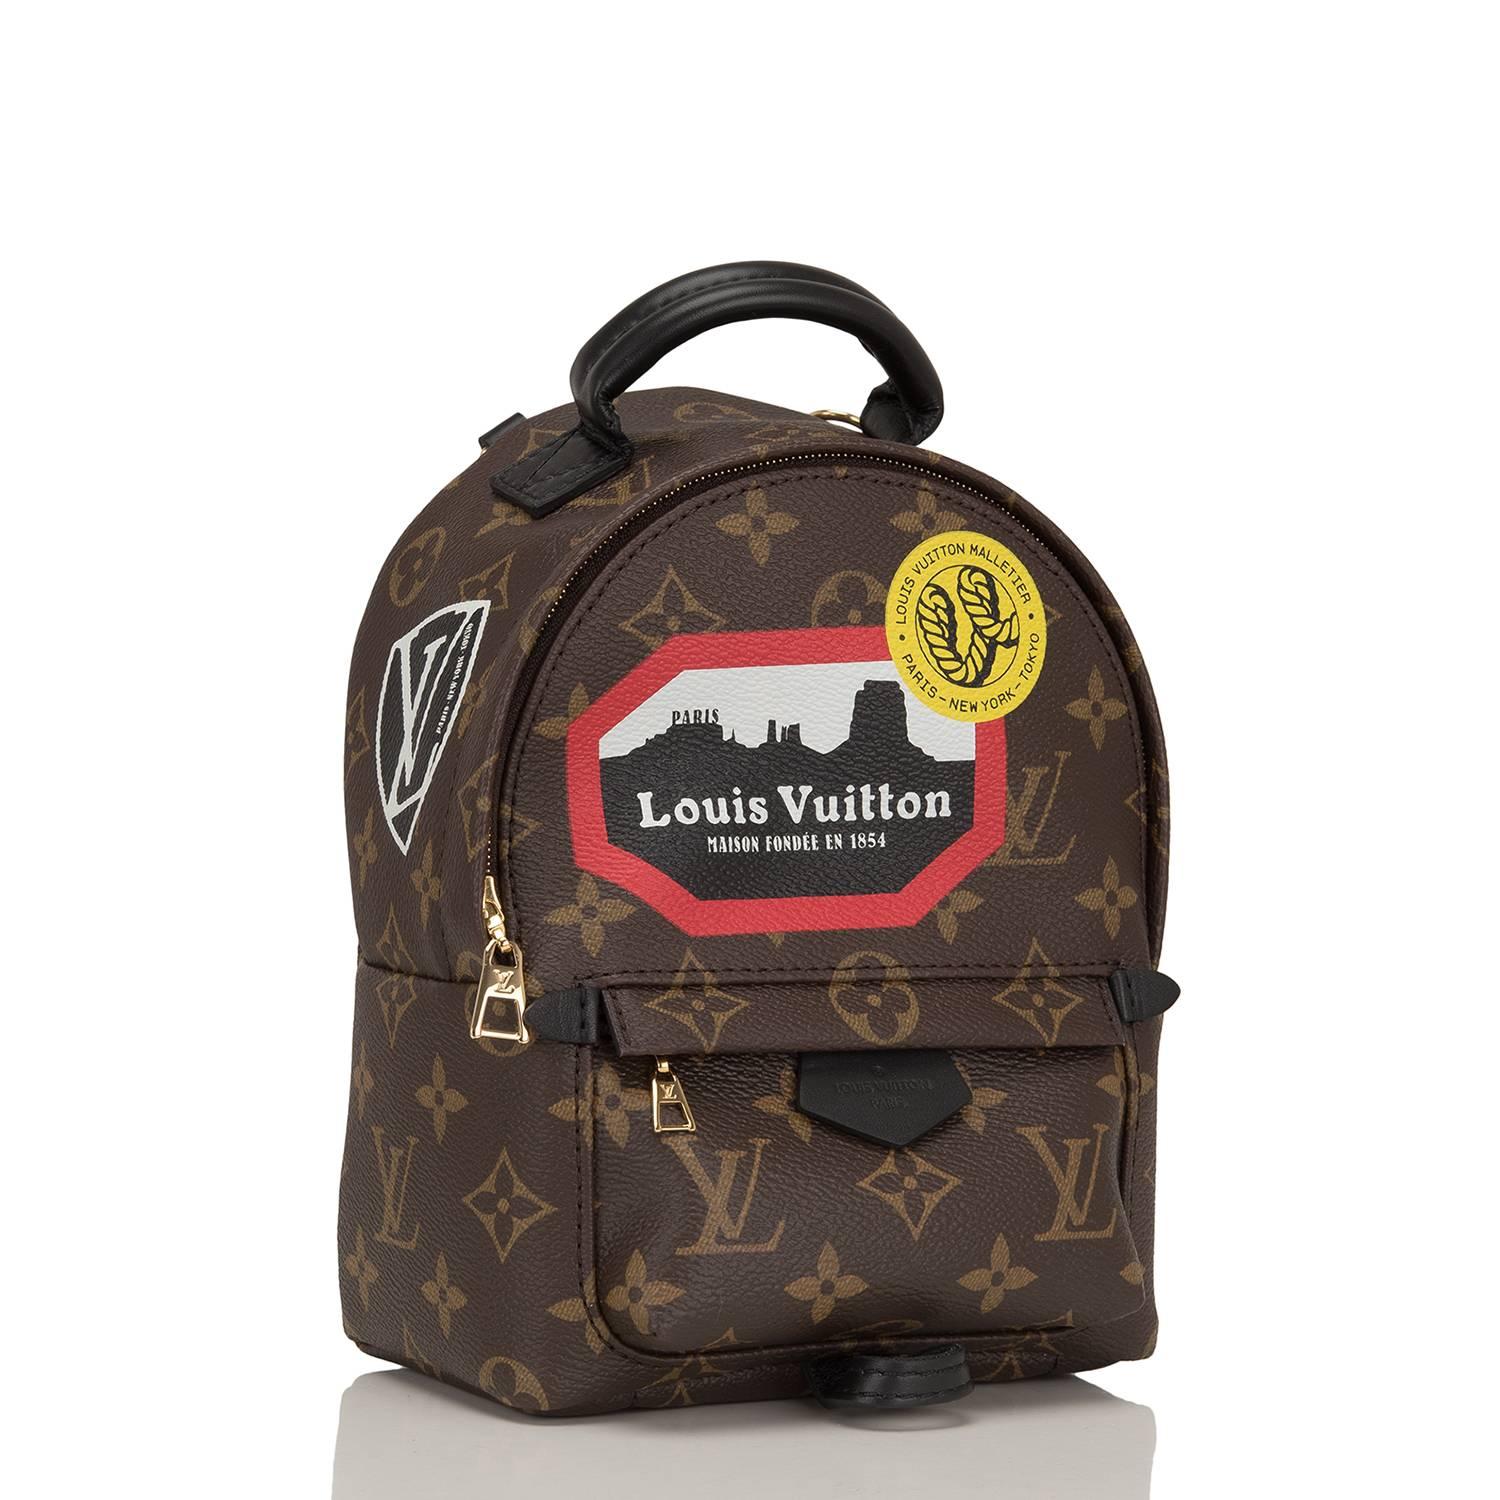 Louis Vuitton "World Tour" Monogram Palm Springs Backpack Mini designed by Nicholas Ghesquiere of coated canvas with golden brass hardware and accented by Louis Vuitton patches.

The Monogram coated canvas has a soft calfskin trim,